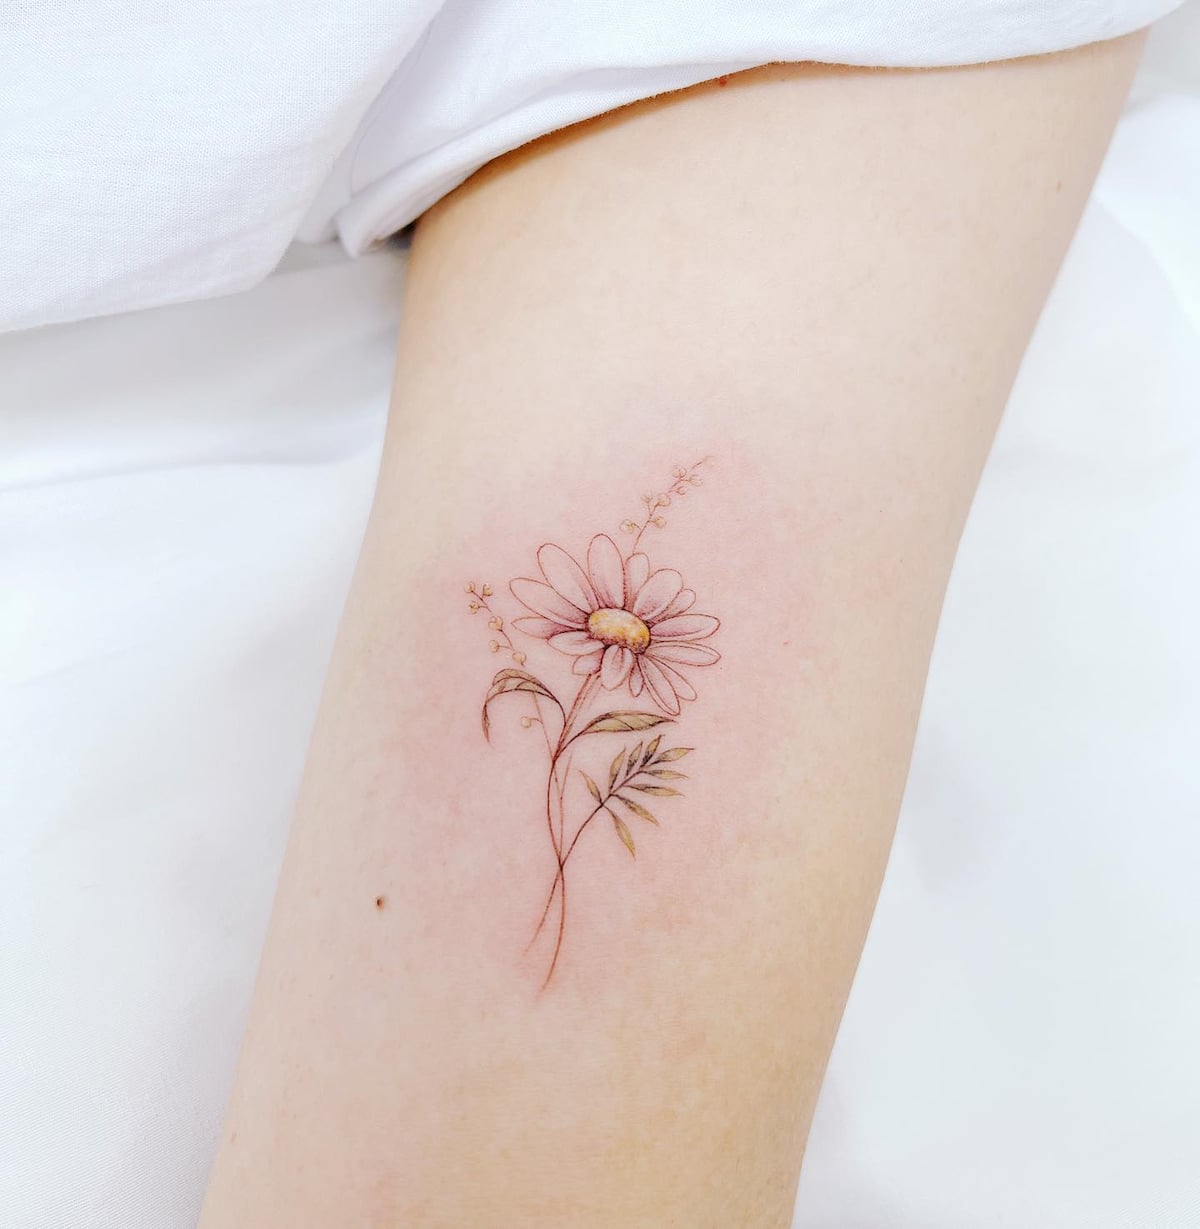 How To Draw A Daisy Tattoo, Step by Step, Drawing Guide, by Dawn - DragoArt